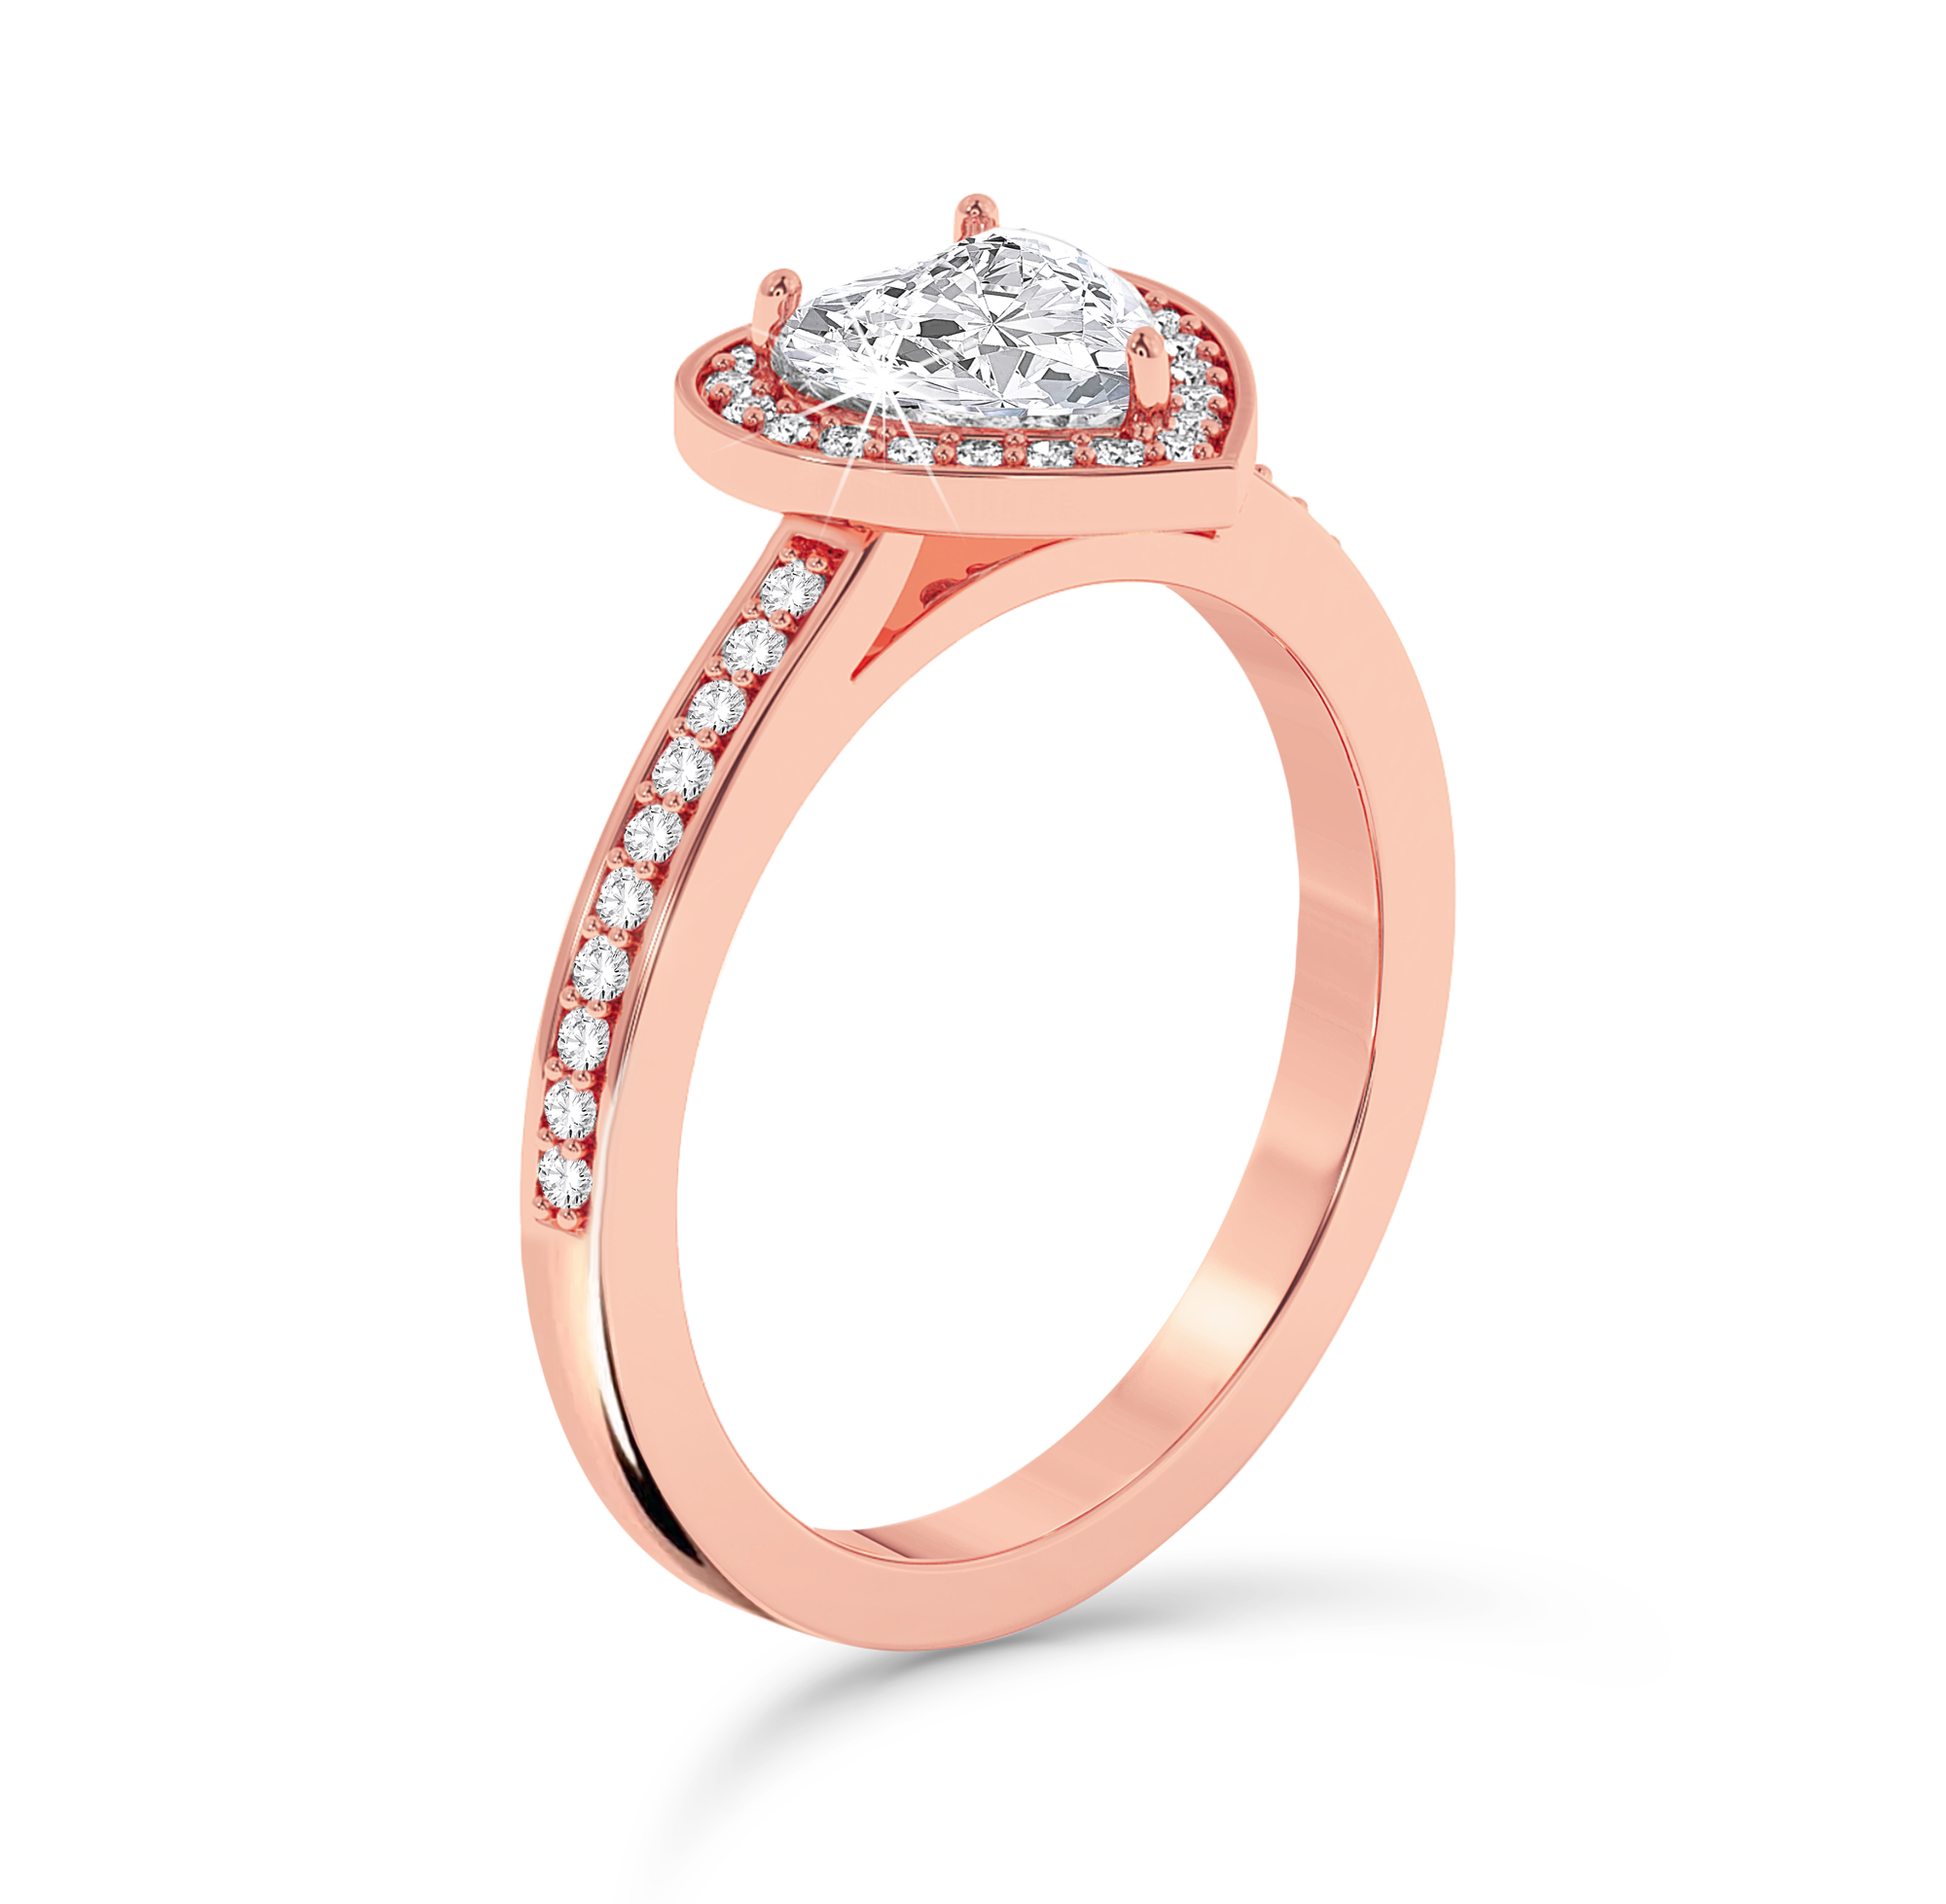 Heart Cut Diamond Ring with Halo & Pave - Rose Gold - Bodega